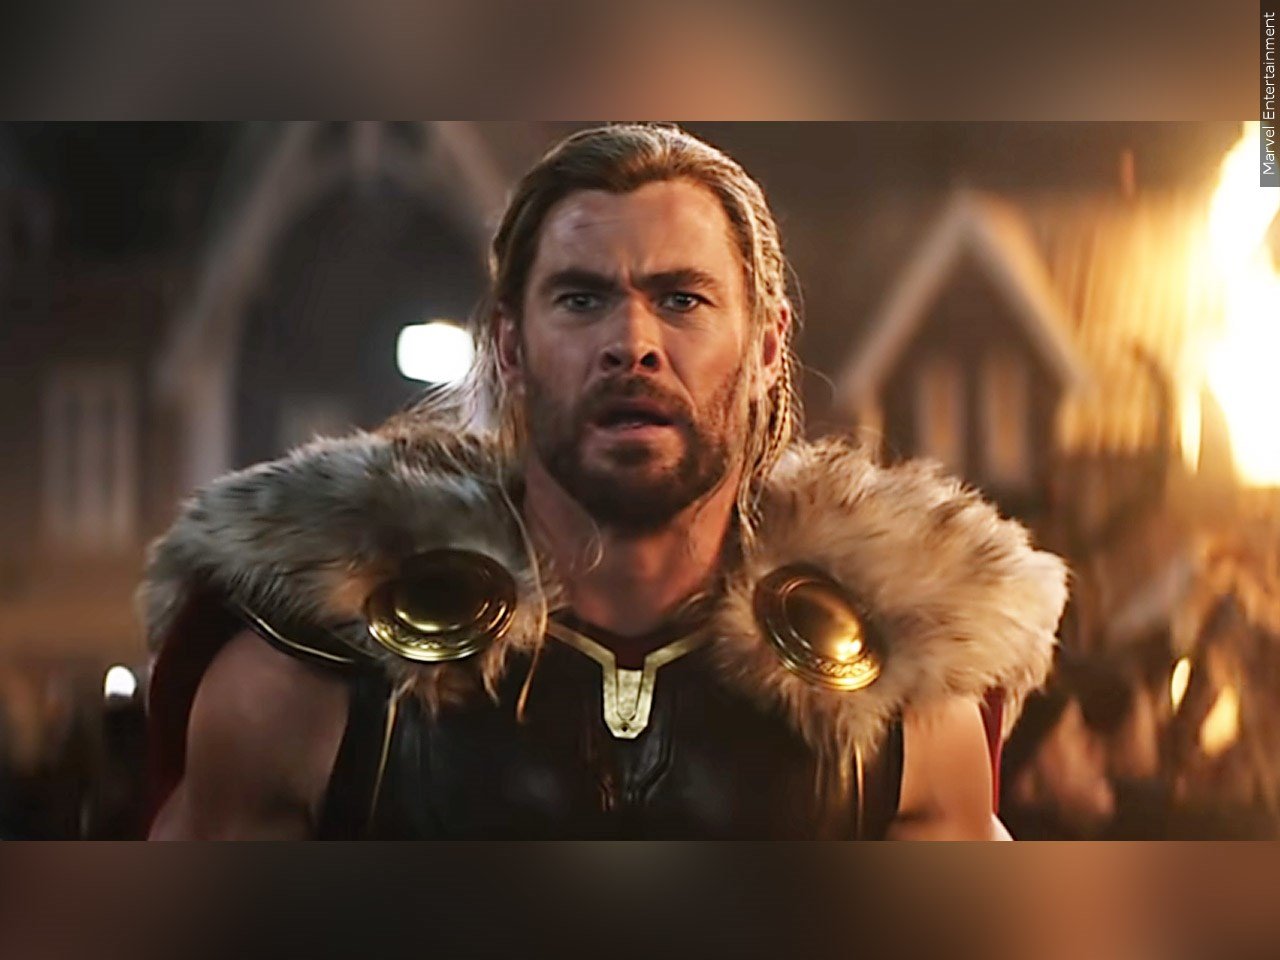 Thor: Love and Thunder Opens With $143 Million at the Box Office